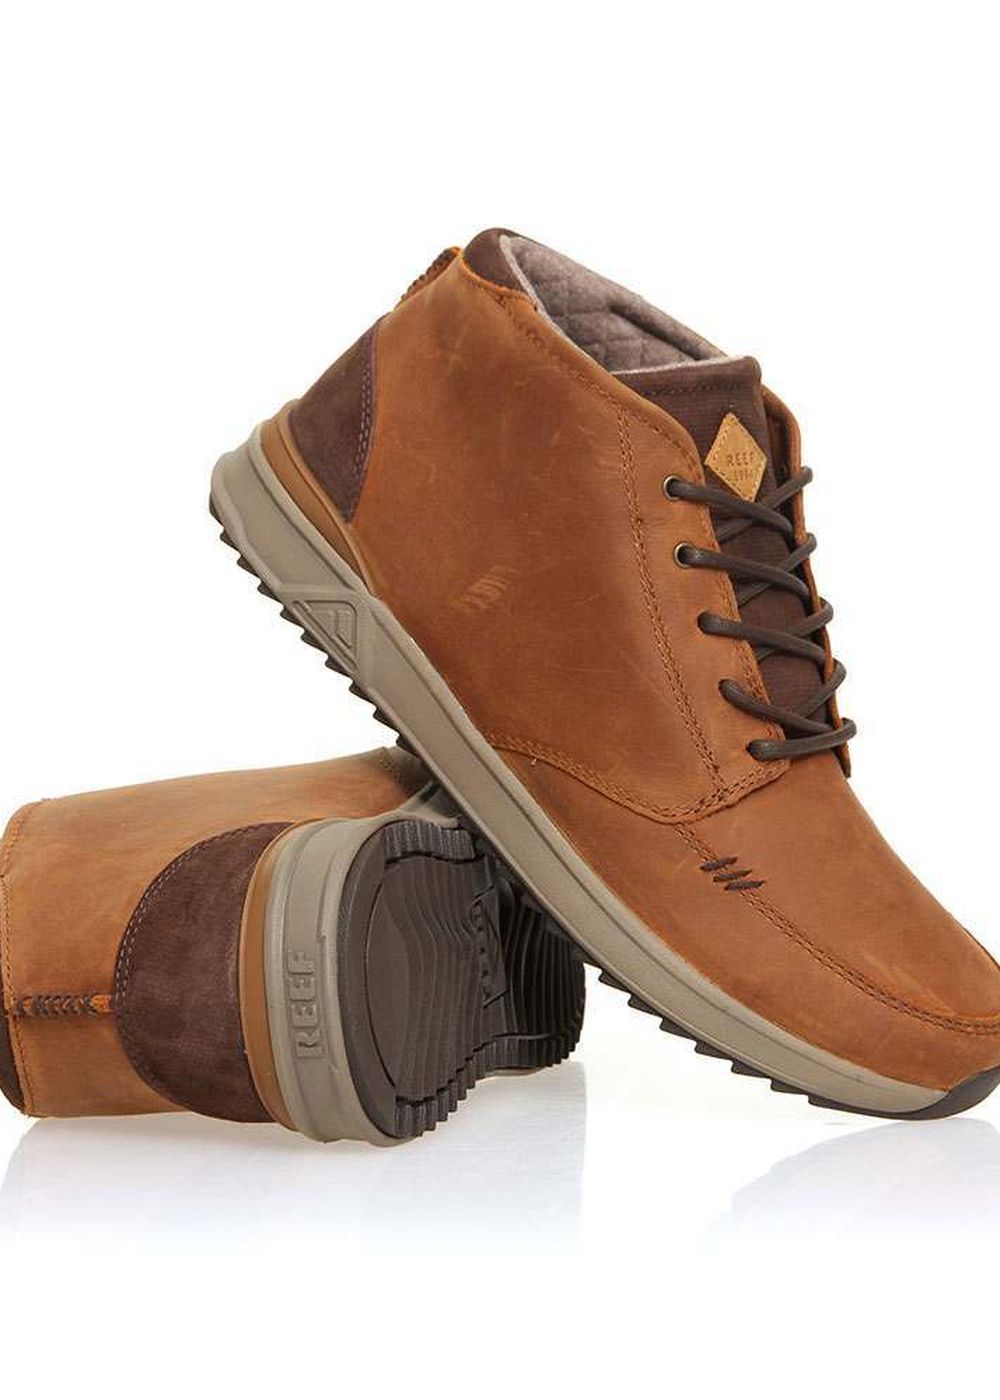 Reef Rover Mid WT Shoes Chocolate/Brown